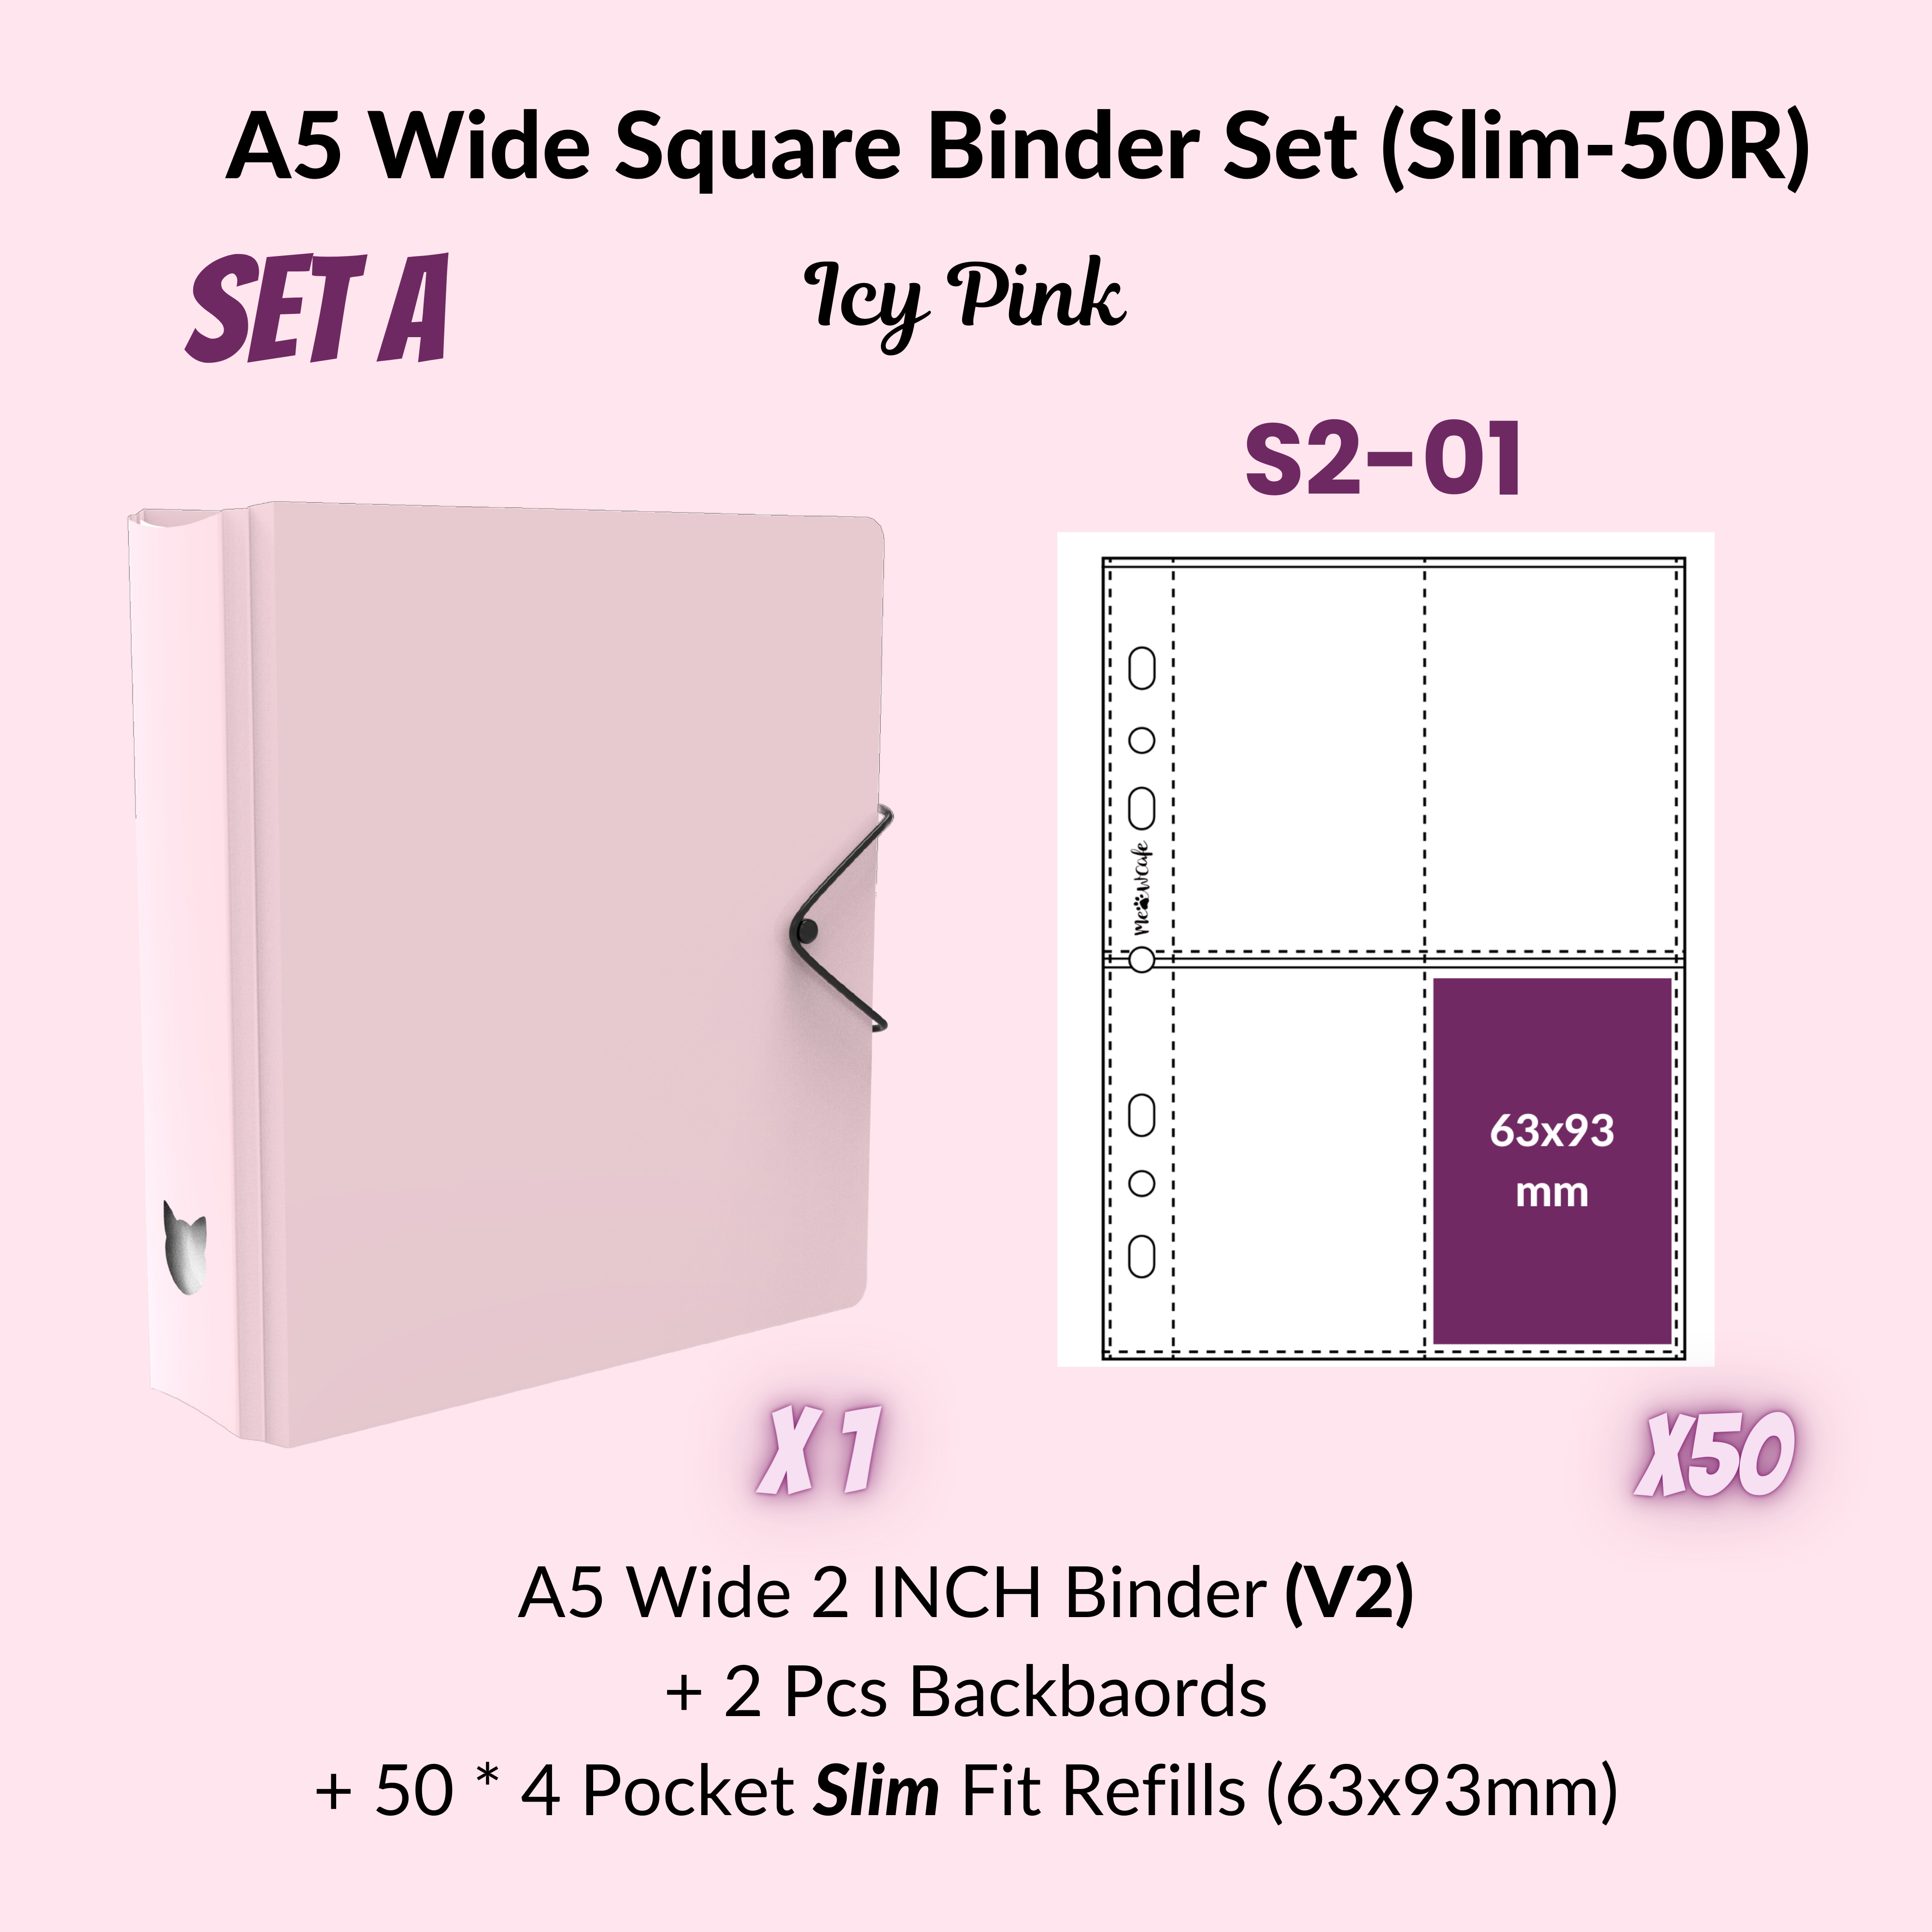 K-KEEP [A4 PLUS] Binder - [2 inch] - [Minimalist Series] - The Most  Comprehensive A4 Binder Specially Designed for Kpop Collector - Icy Pink /